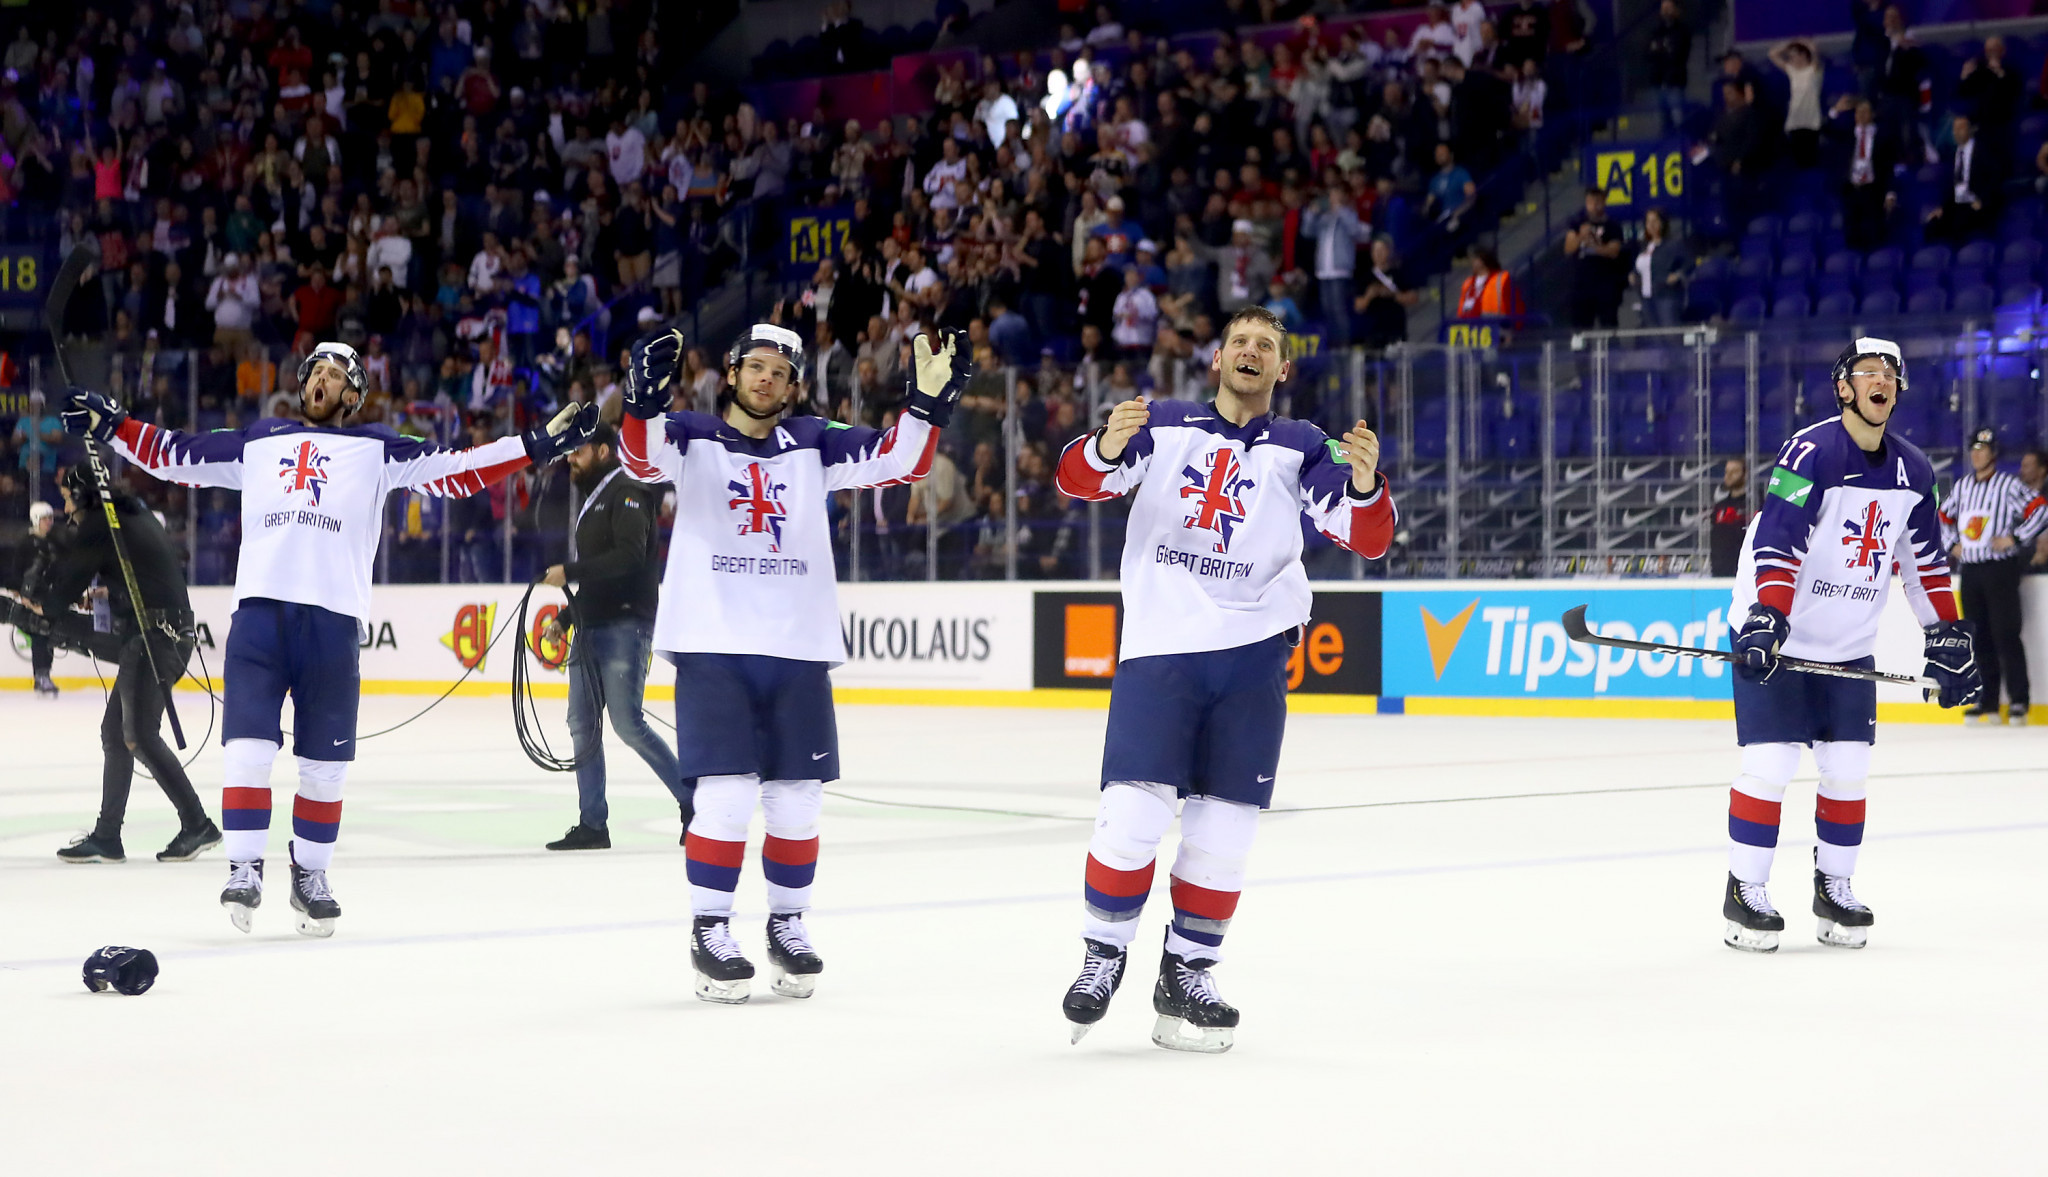 British team looking at future with new faces for IIHF Ice Hockey World Championship